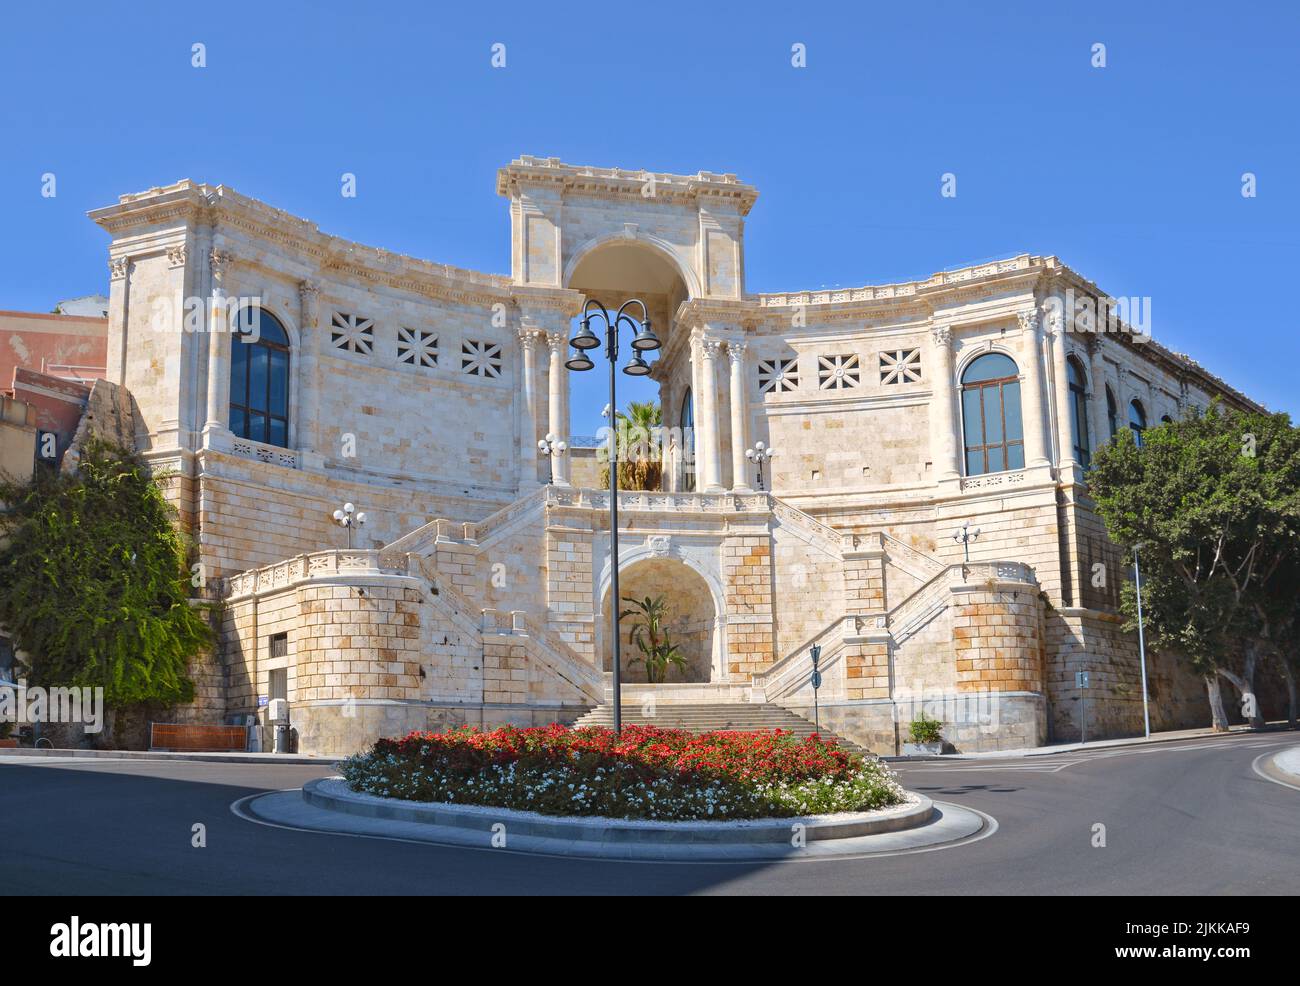 The Bastione Saint Remy landmark structure in the city of Cagliari, Sardinia, Italy Stock Photo